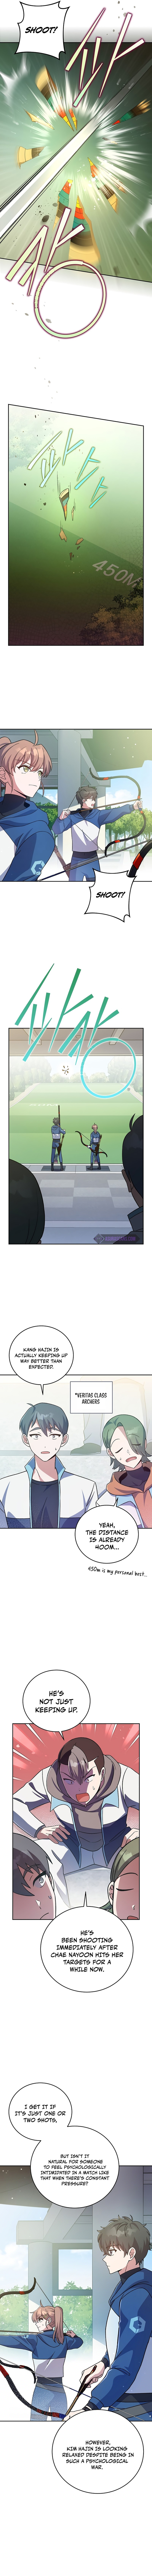 The Novel’s Extra (Remake) - Chapter 49 Page 4